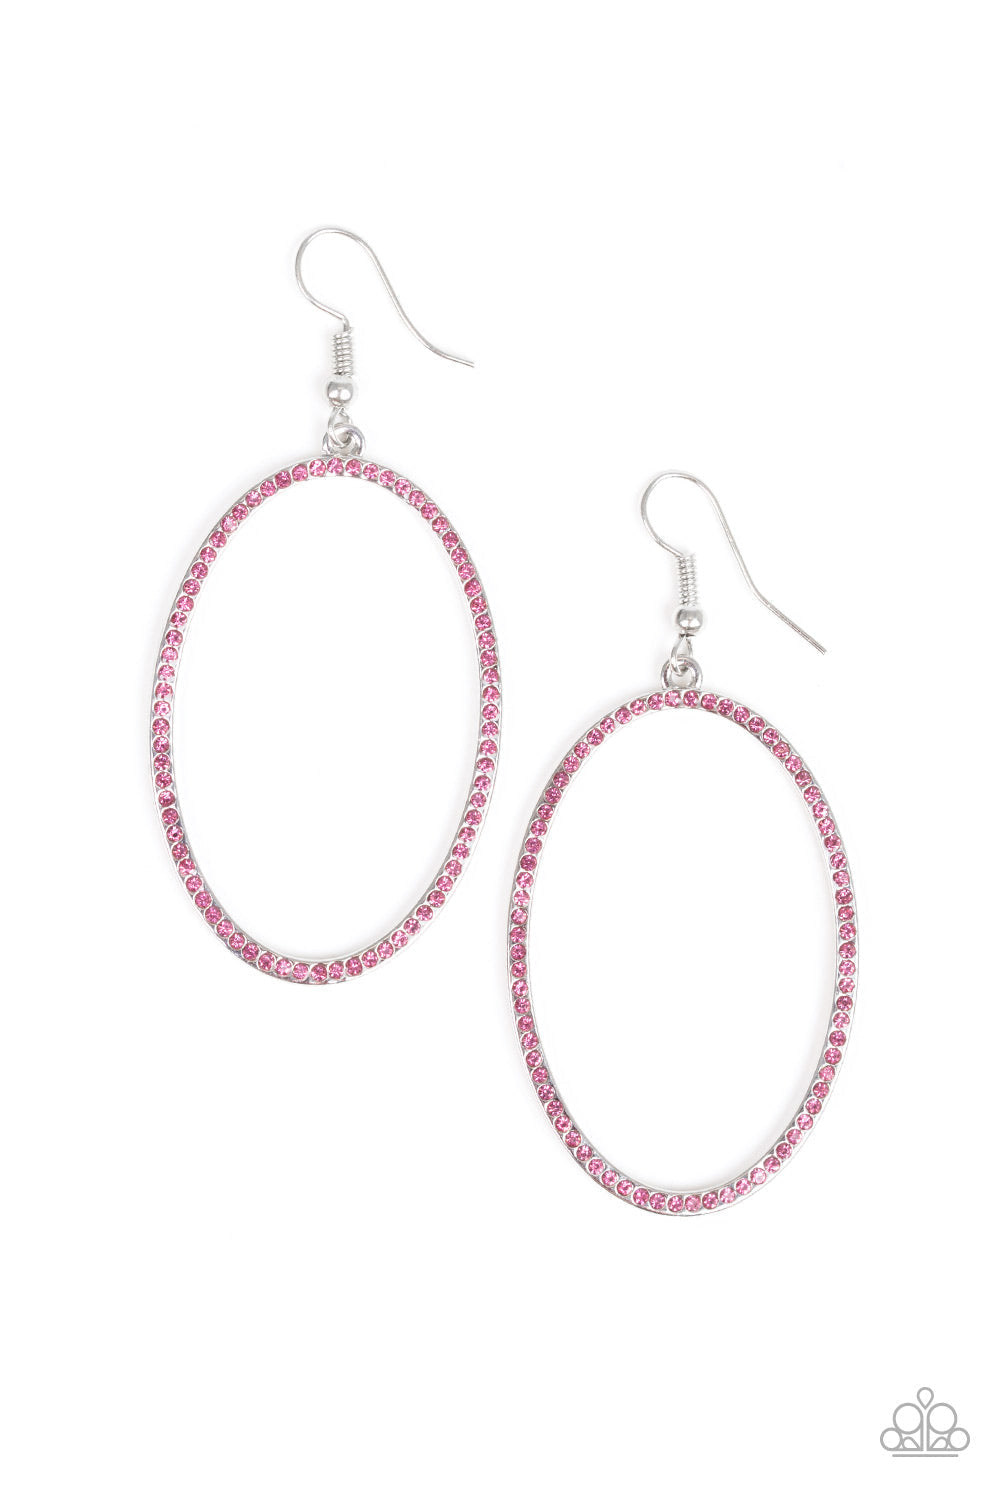 Dazzle On Demand - Pink and Silver Earrings Silver Earrings Bejeweled Accessories By Kristie Featuring Paparazzi Jewelry - Trendy fashion jewelry for everyone -